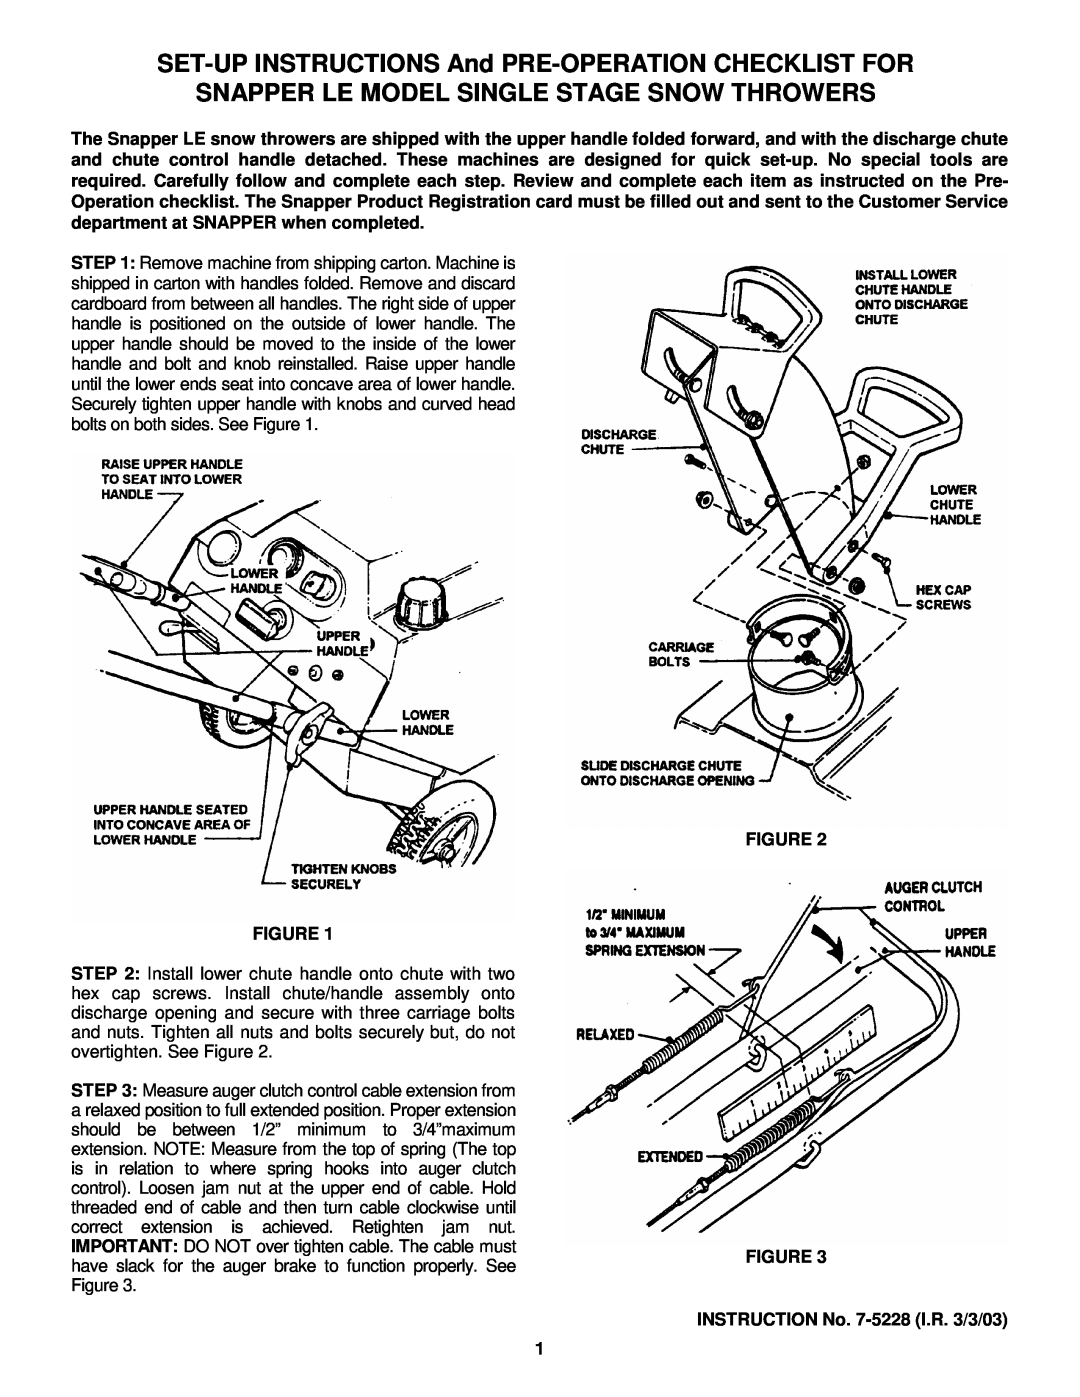 Snapper MCS2000 manual SET-UPINSTRUCTIONS And PRE-OPERATIONCHECKLIST FOR, Snapper Le Model Single Stage Snow Throwers 